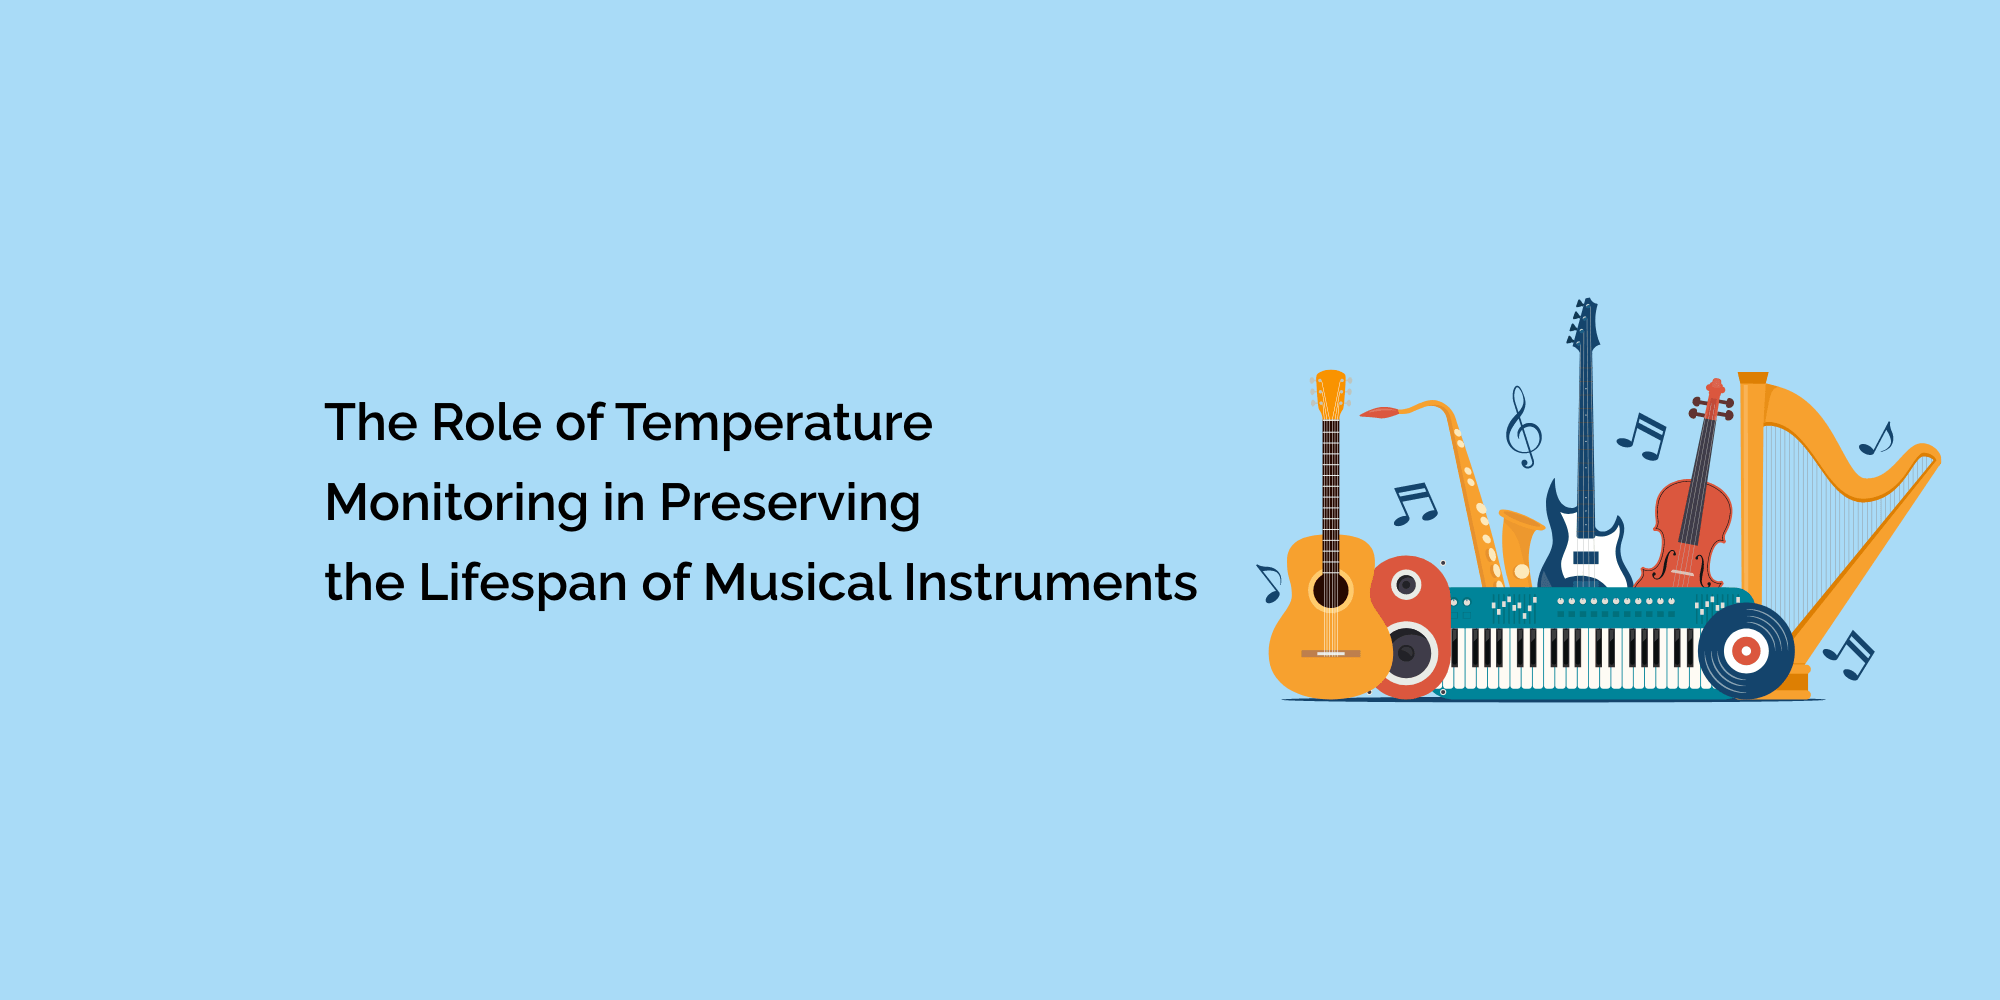 The Role of Temperature Monitoring in Preserving the Lifespan of Musical Instruments